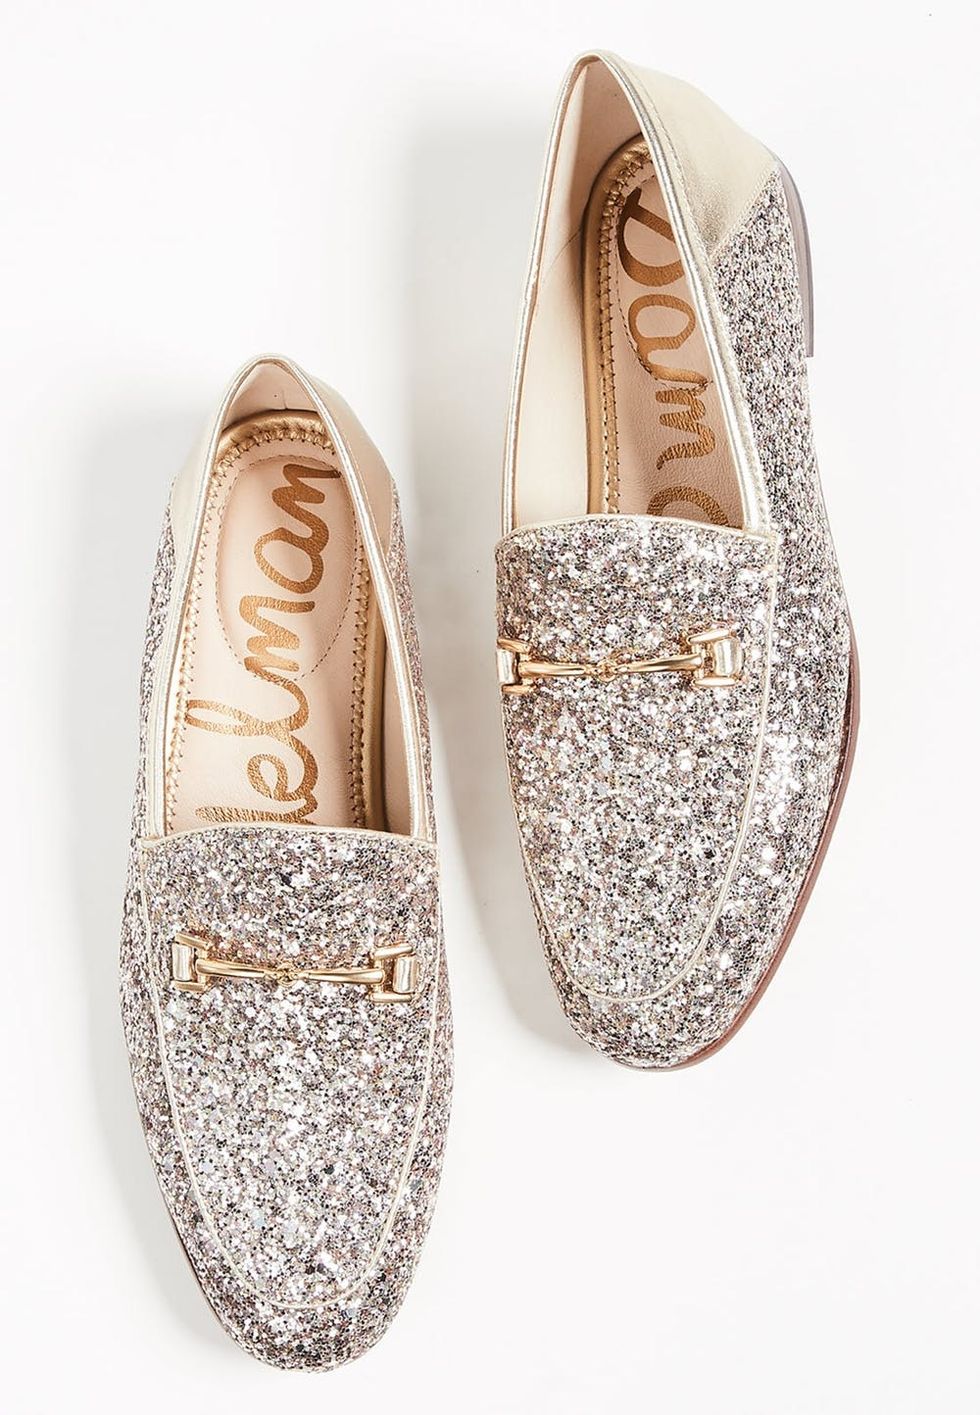 10 Glittery Shoes to Add Sparkle to Every Holiday Look - Brit + Co